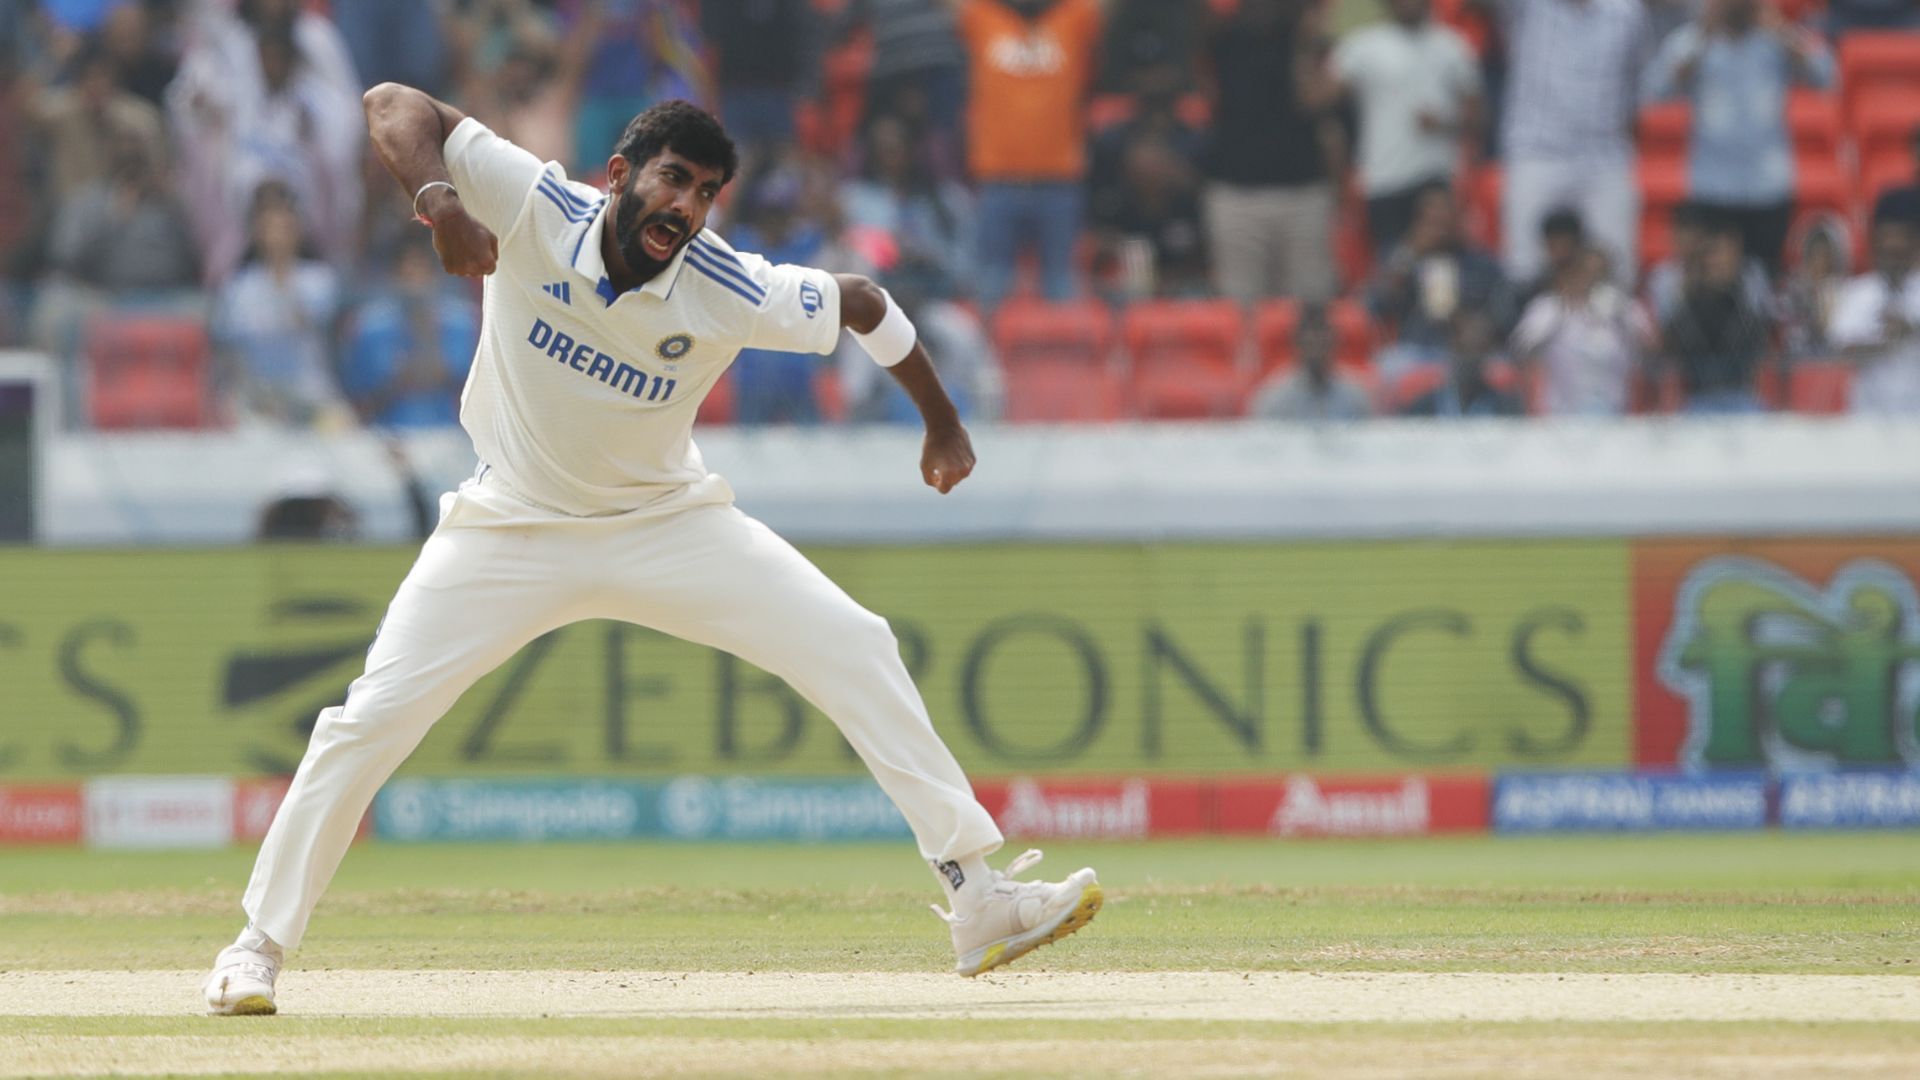 Jasprit Bumrah made his mark in what was overall a disappointing bowling performance from India